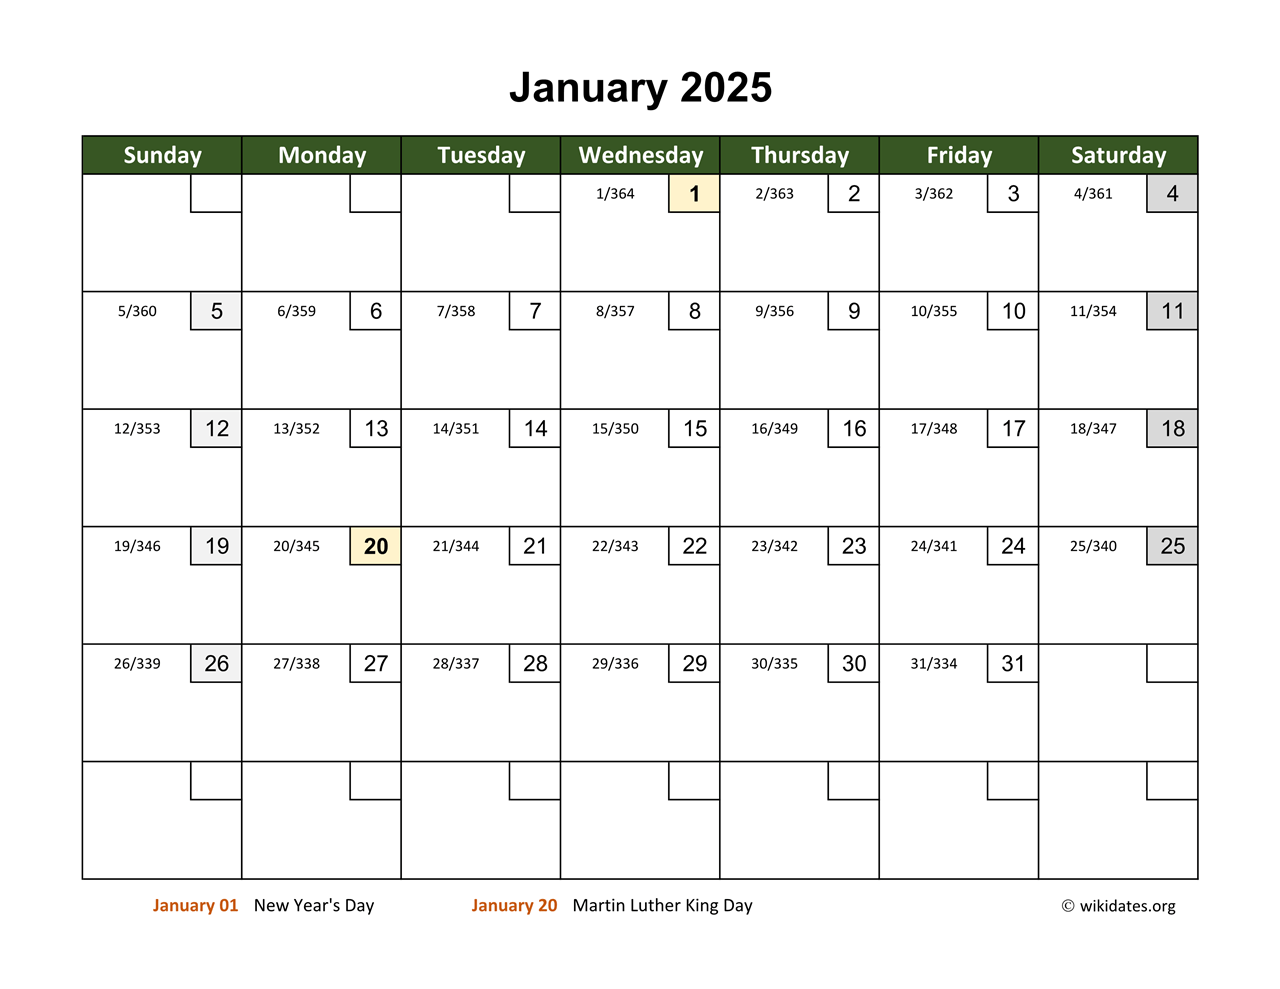 January 2025 Calendar With Day Numbers WikiDates